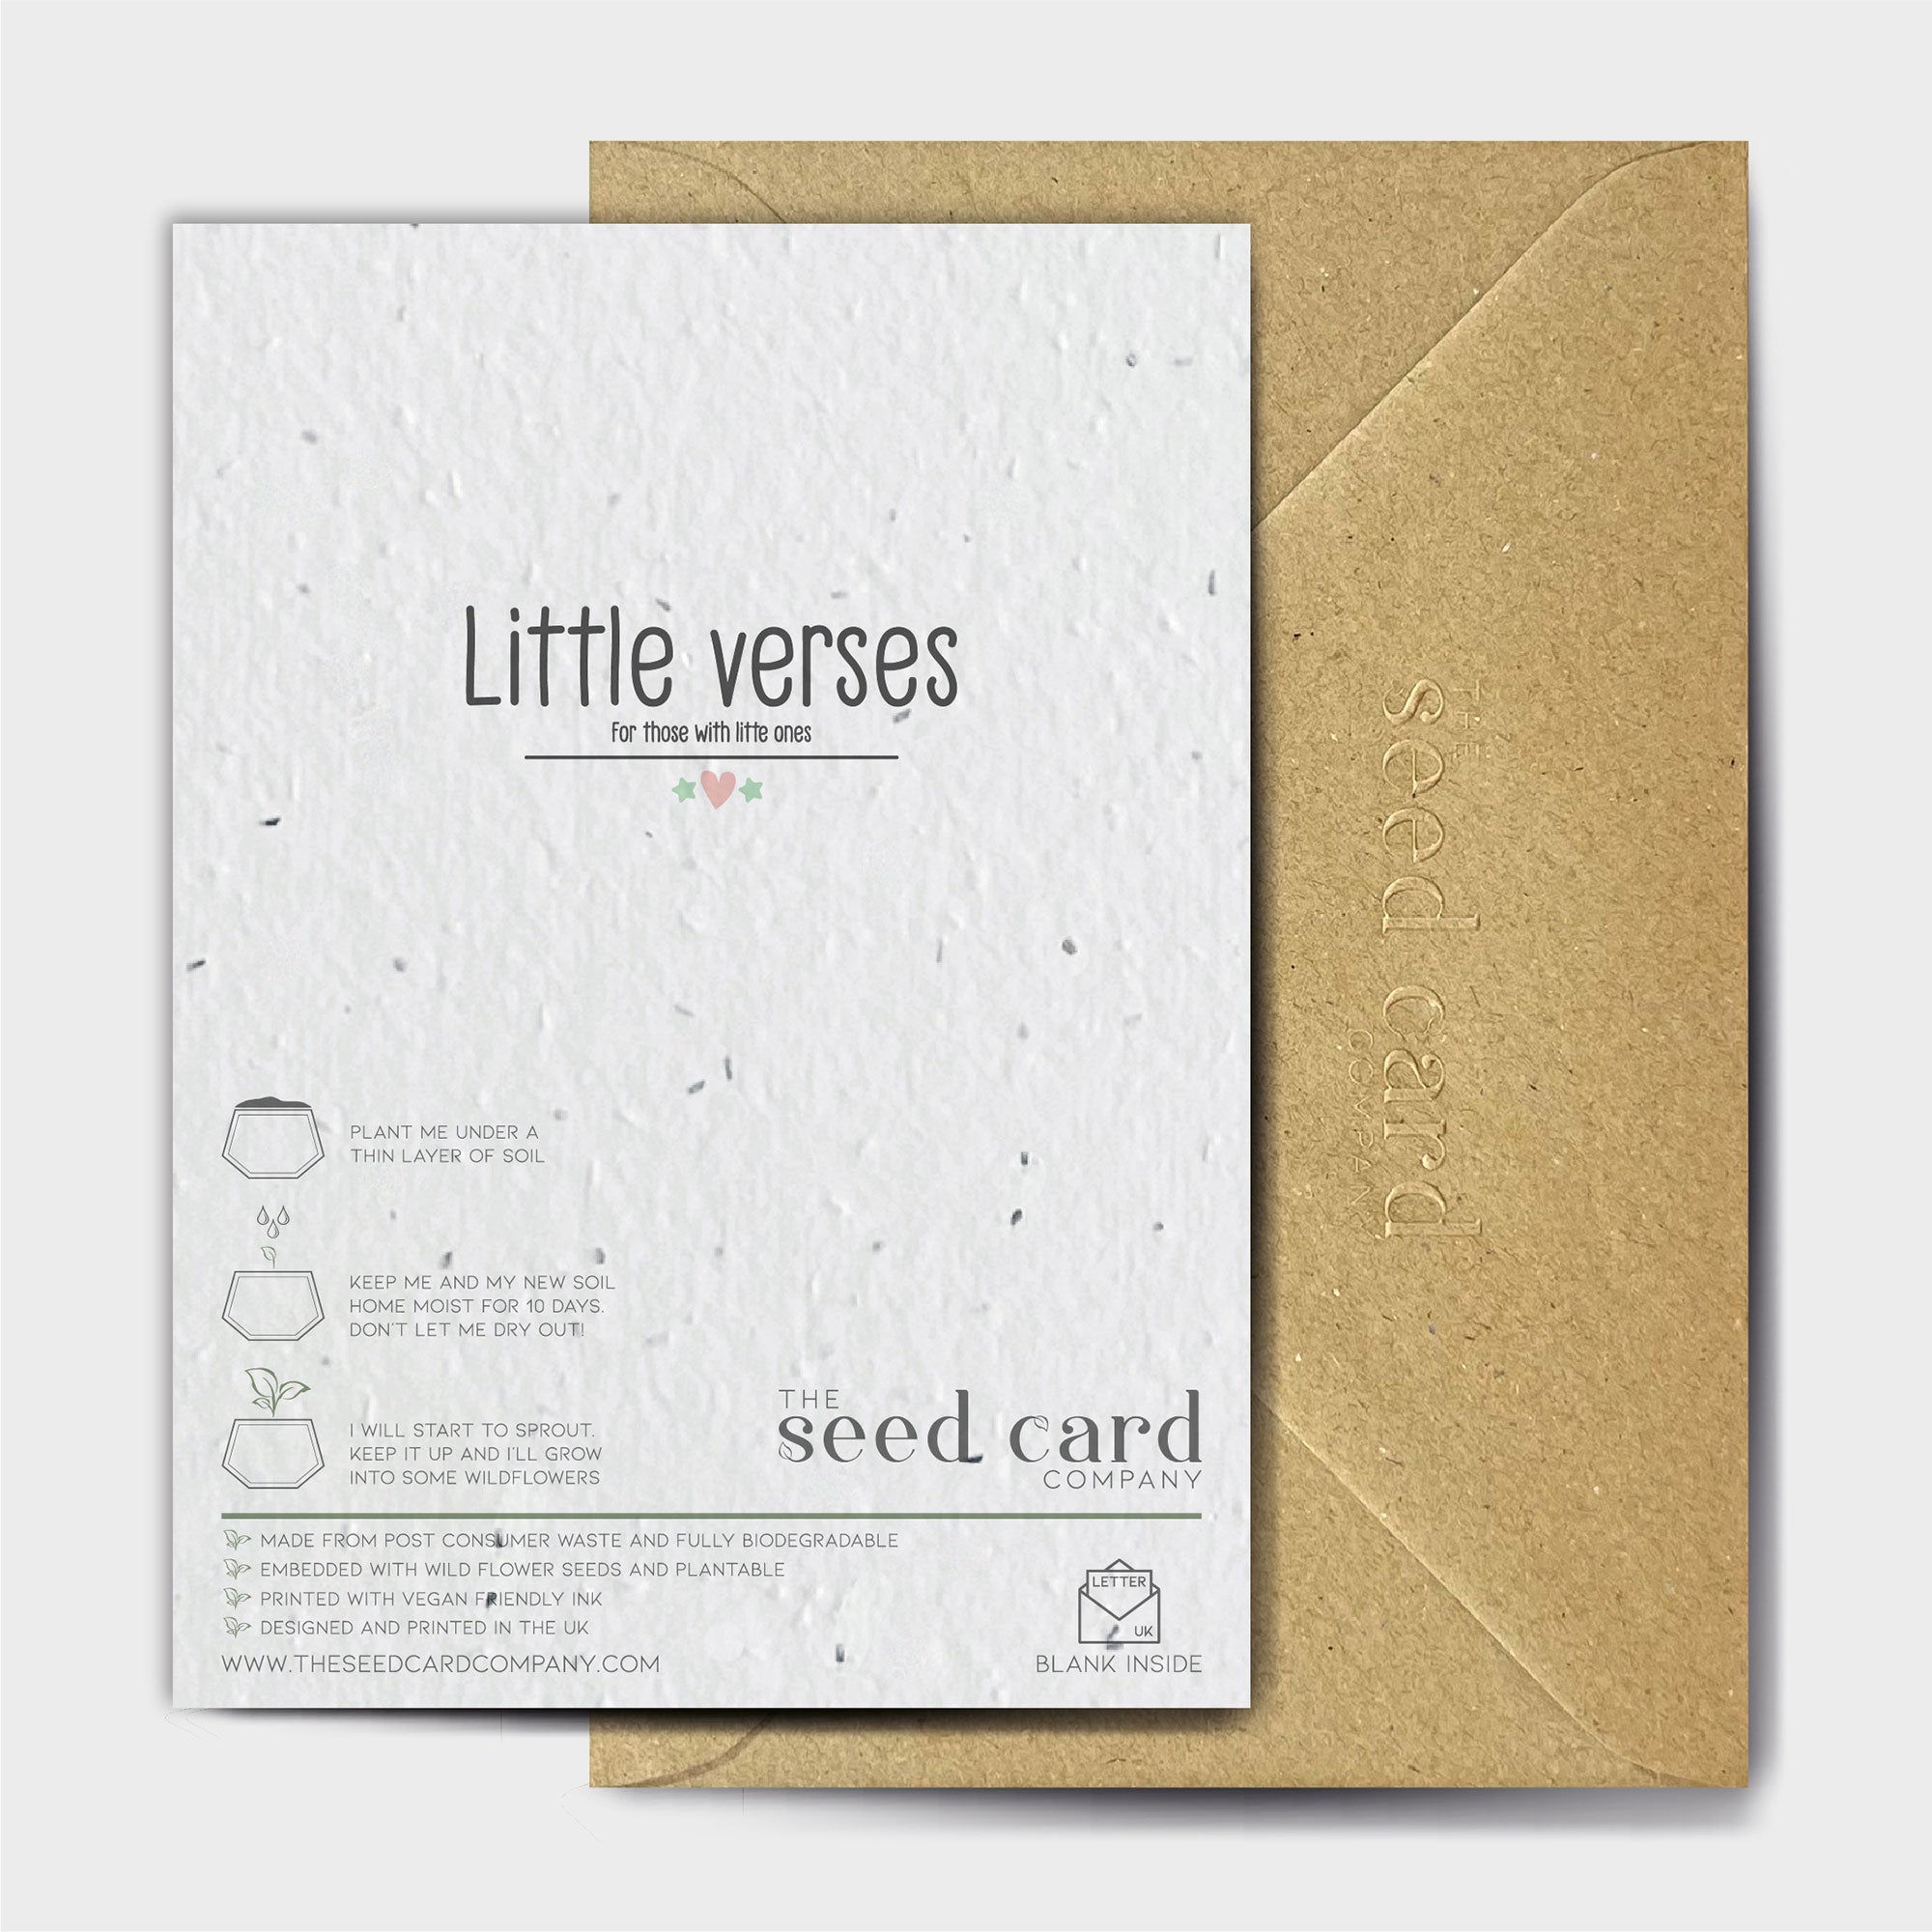 Shop online The Wheels On The Bus - 100% biodegradable seed-embedded cards Shop -The Seed Card Company